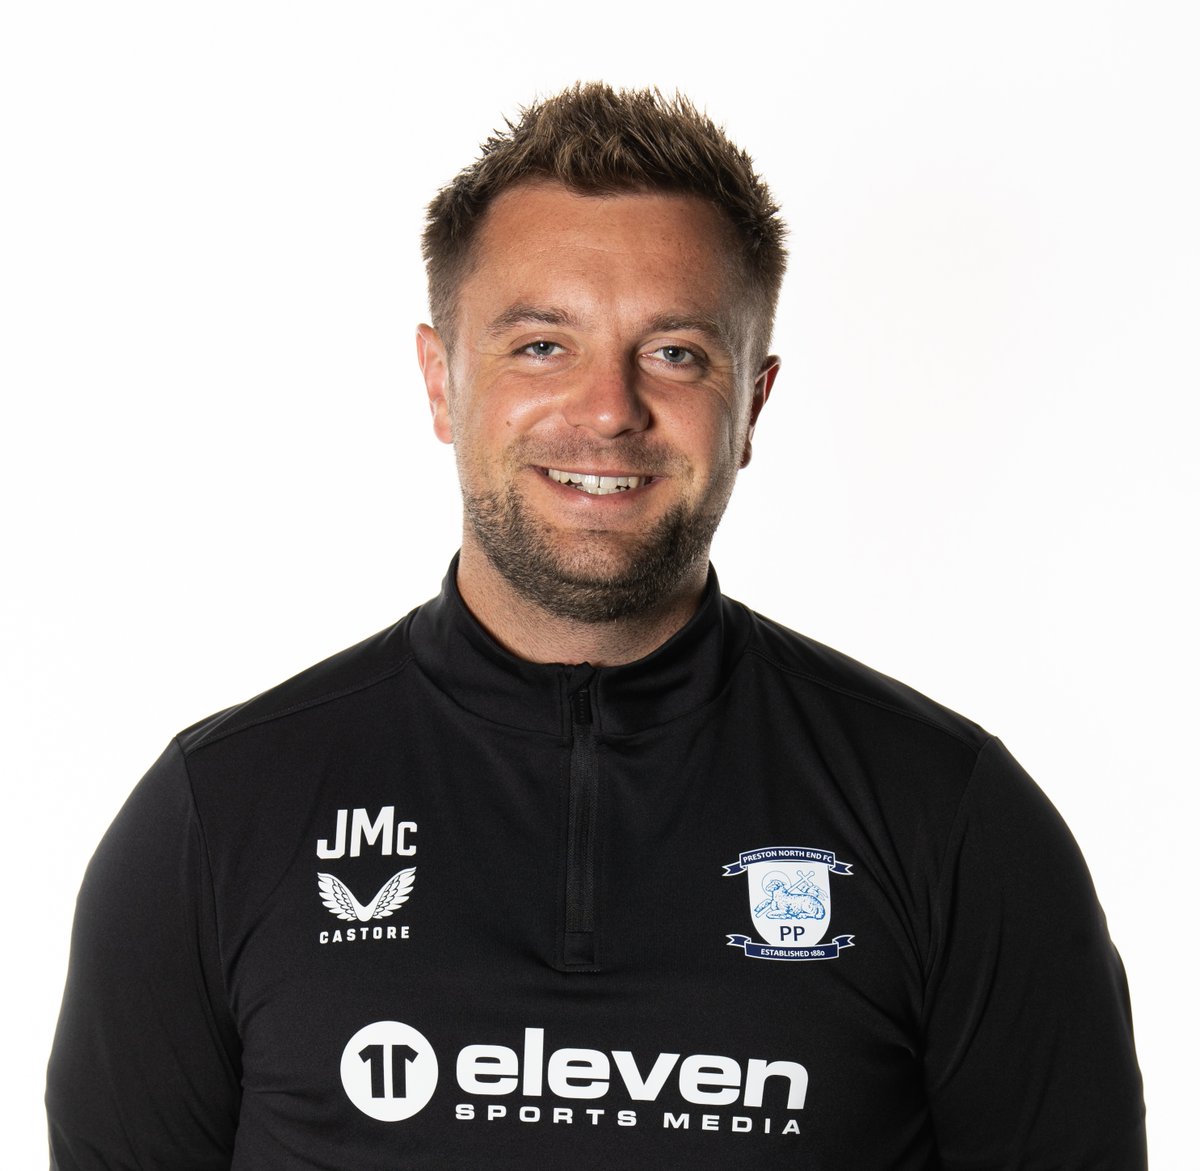 Sports Coaching graduate James McGown discusses how his @UCLan degrees and experiences led him to his current role at Preston North End F.C as Lead Foundation Phase Coach ⚽ #UCLanAlumni Always part of UCLan 🌹 Read his story 👇 ow.ly/P1QJ50QUkCl